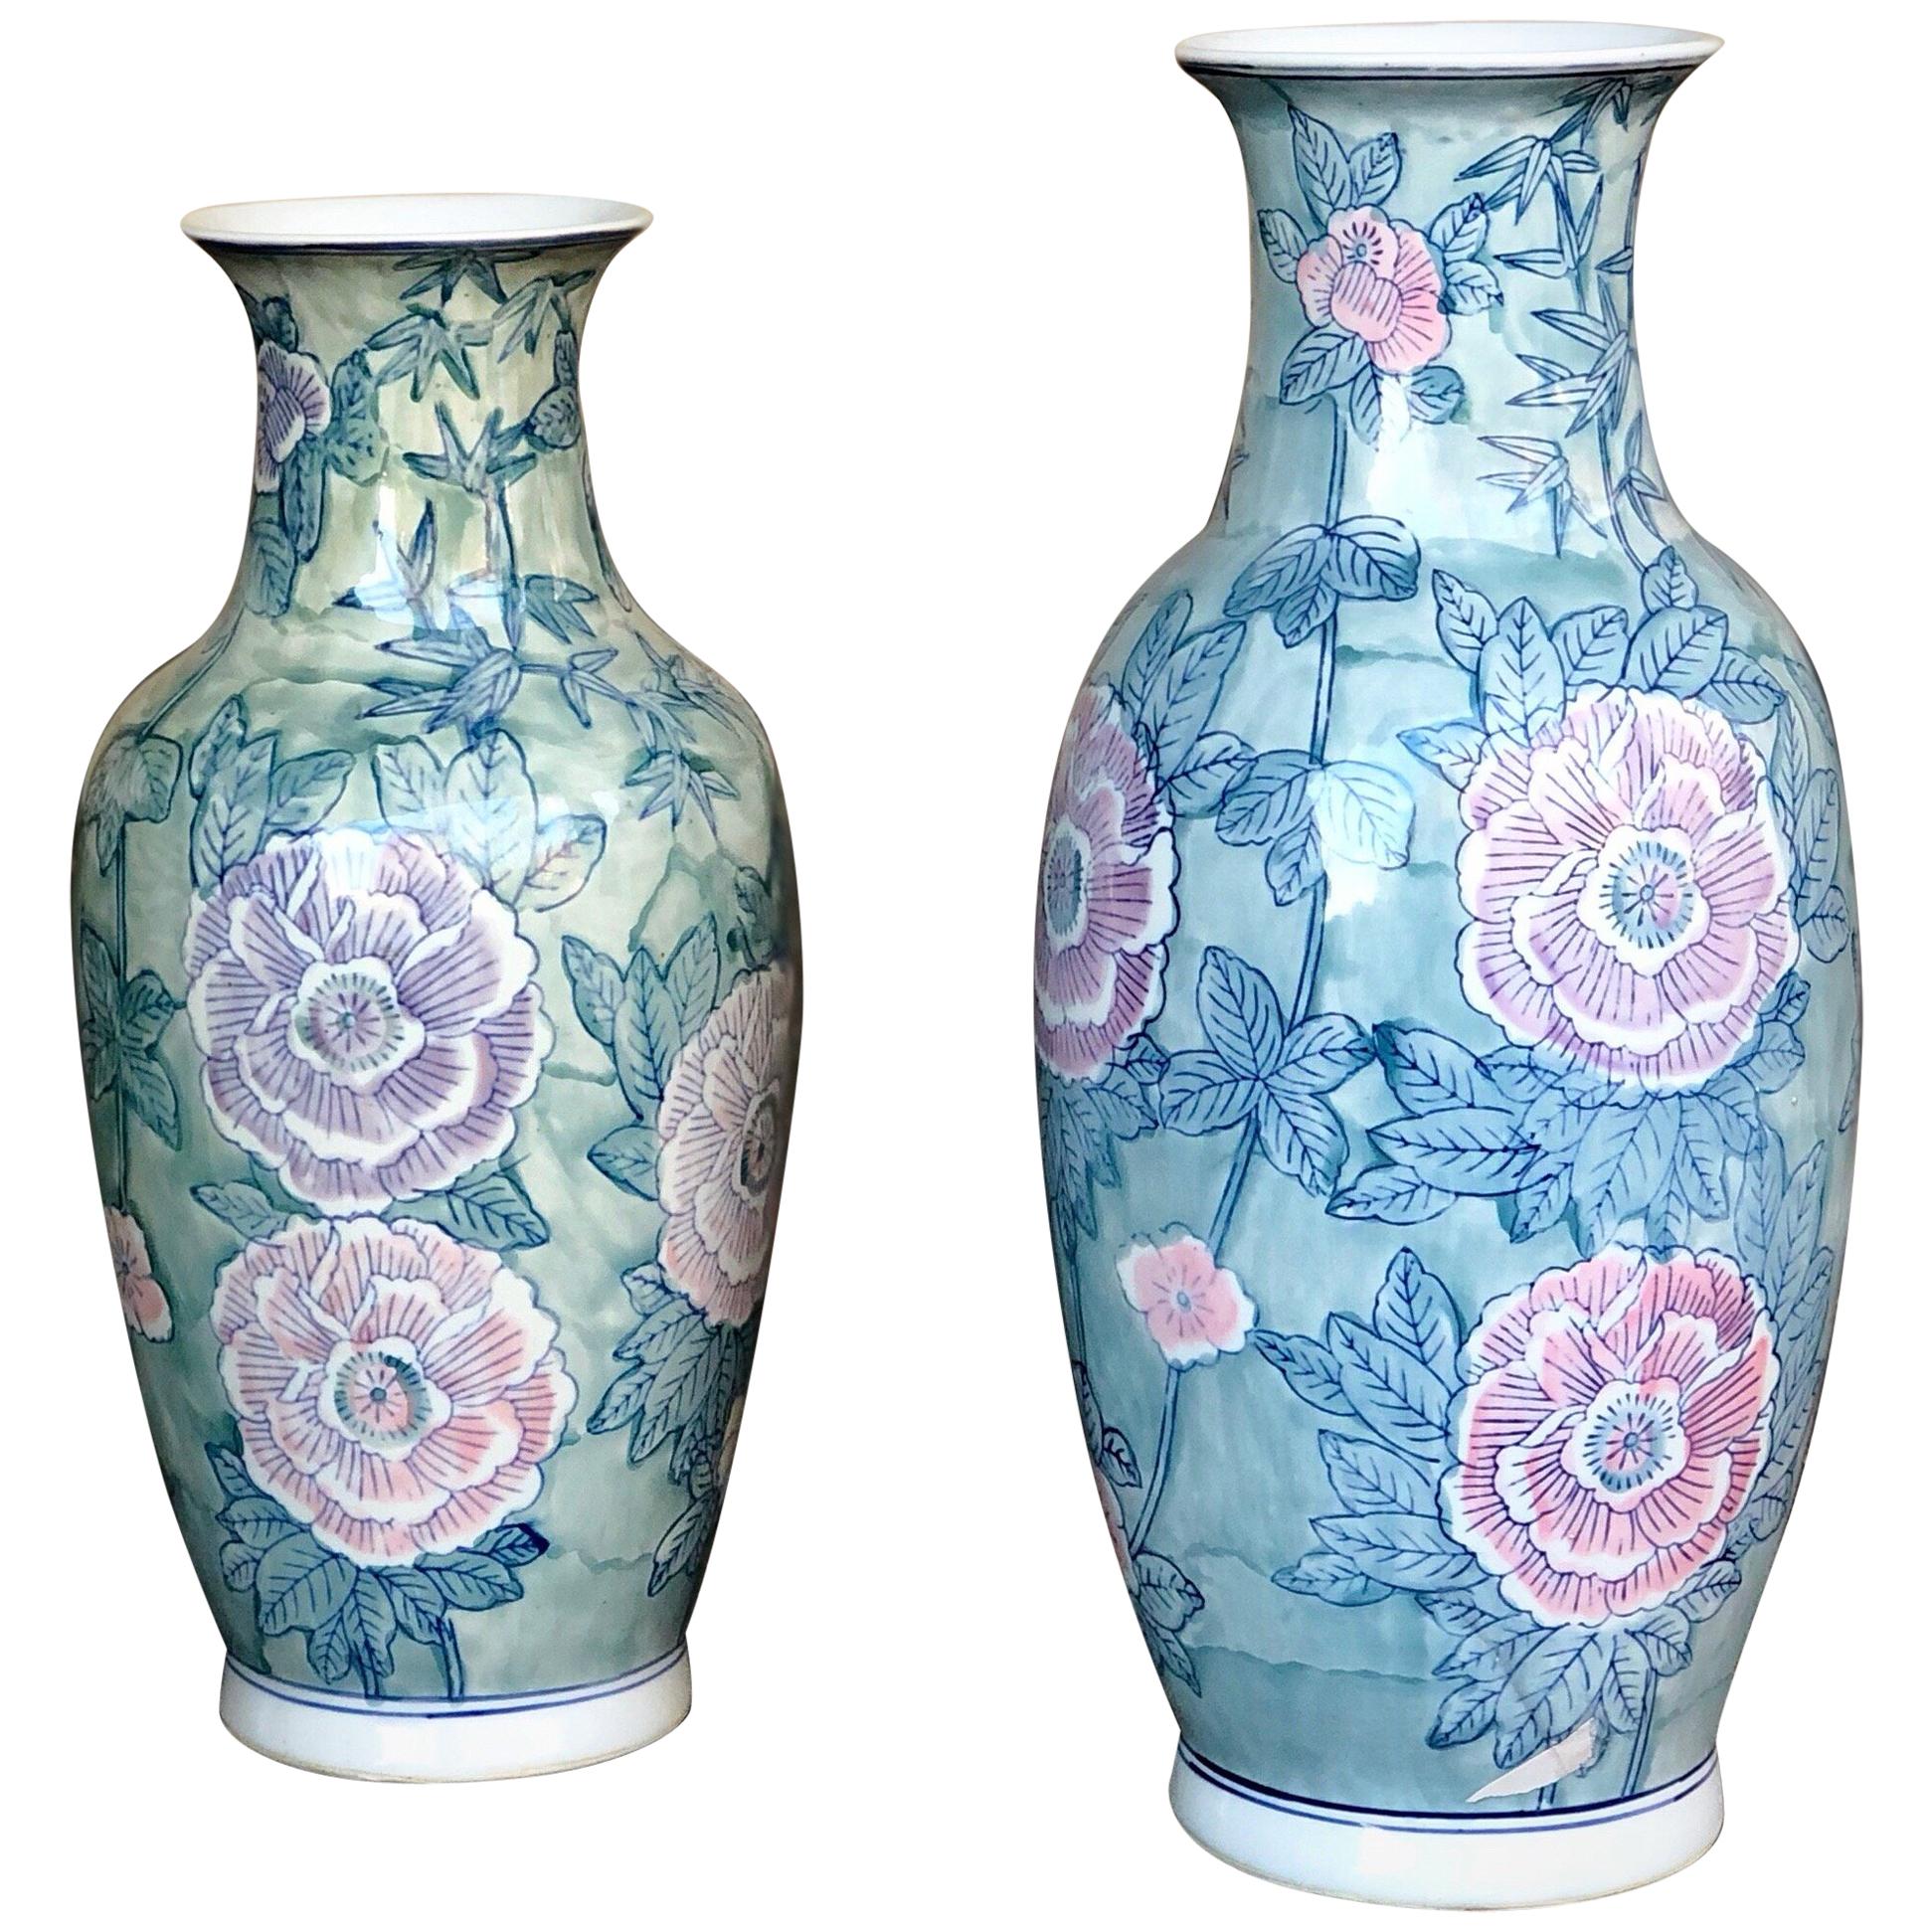 Pair of Chinese Large Flower Vases ON SALE 